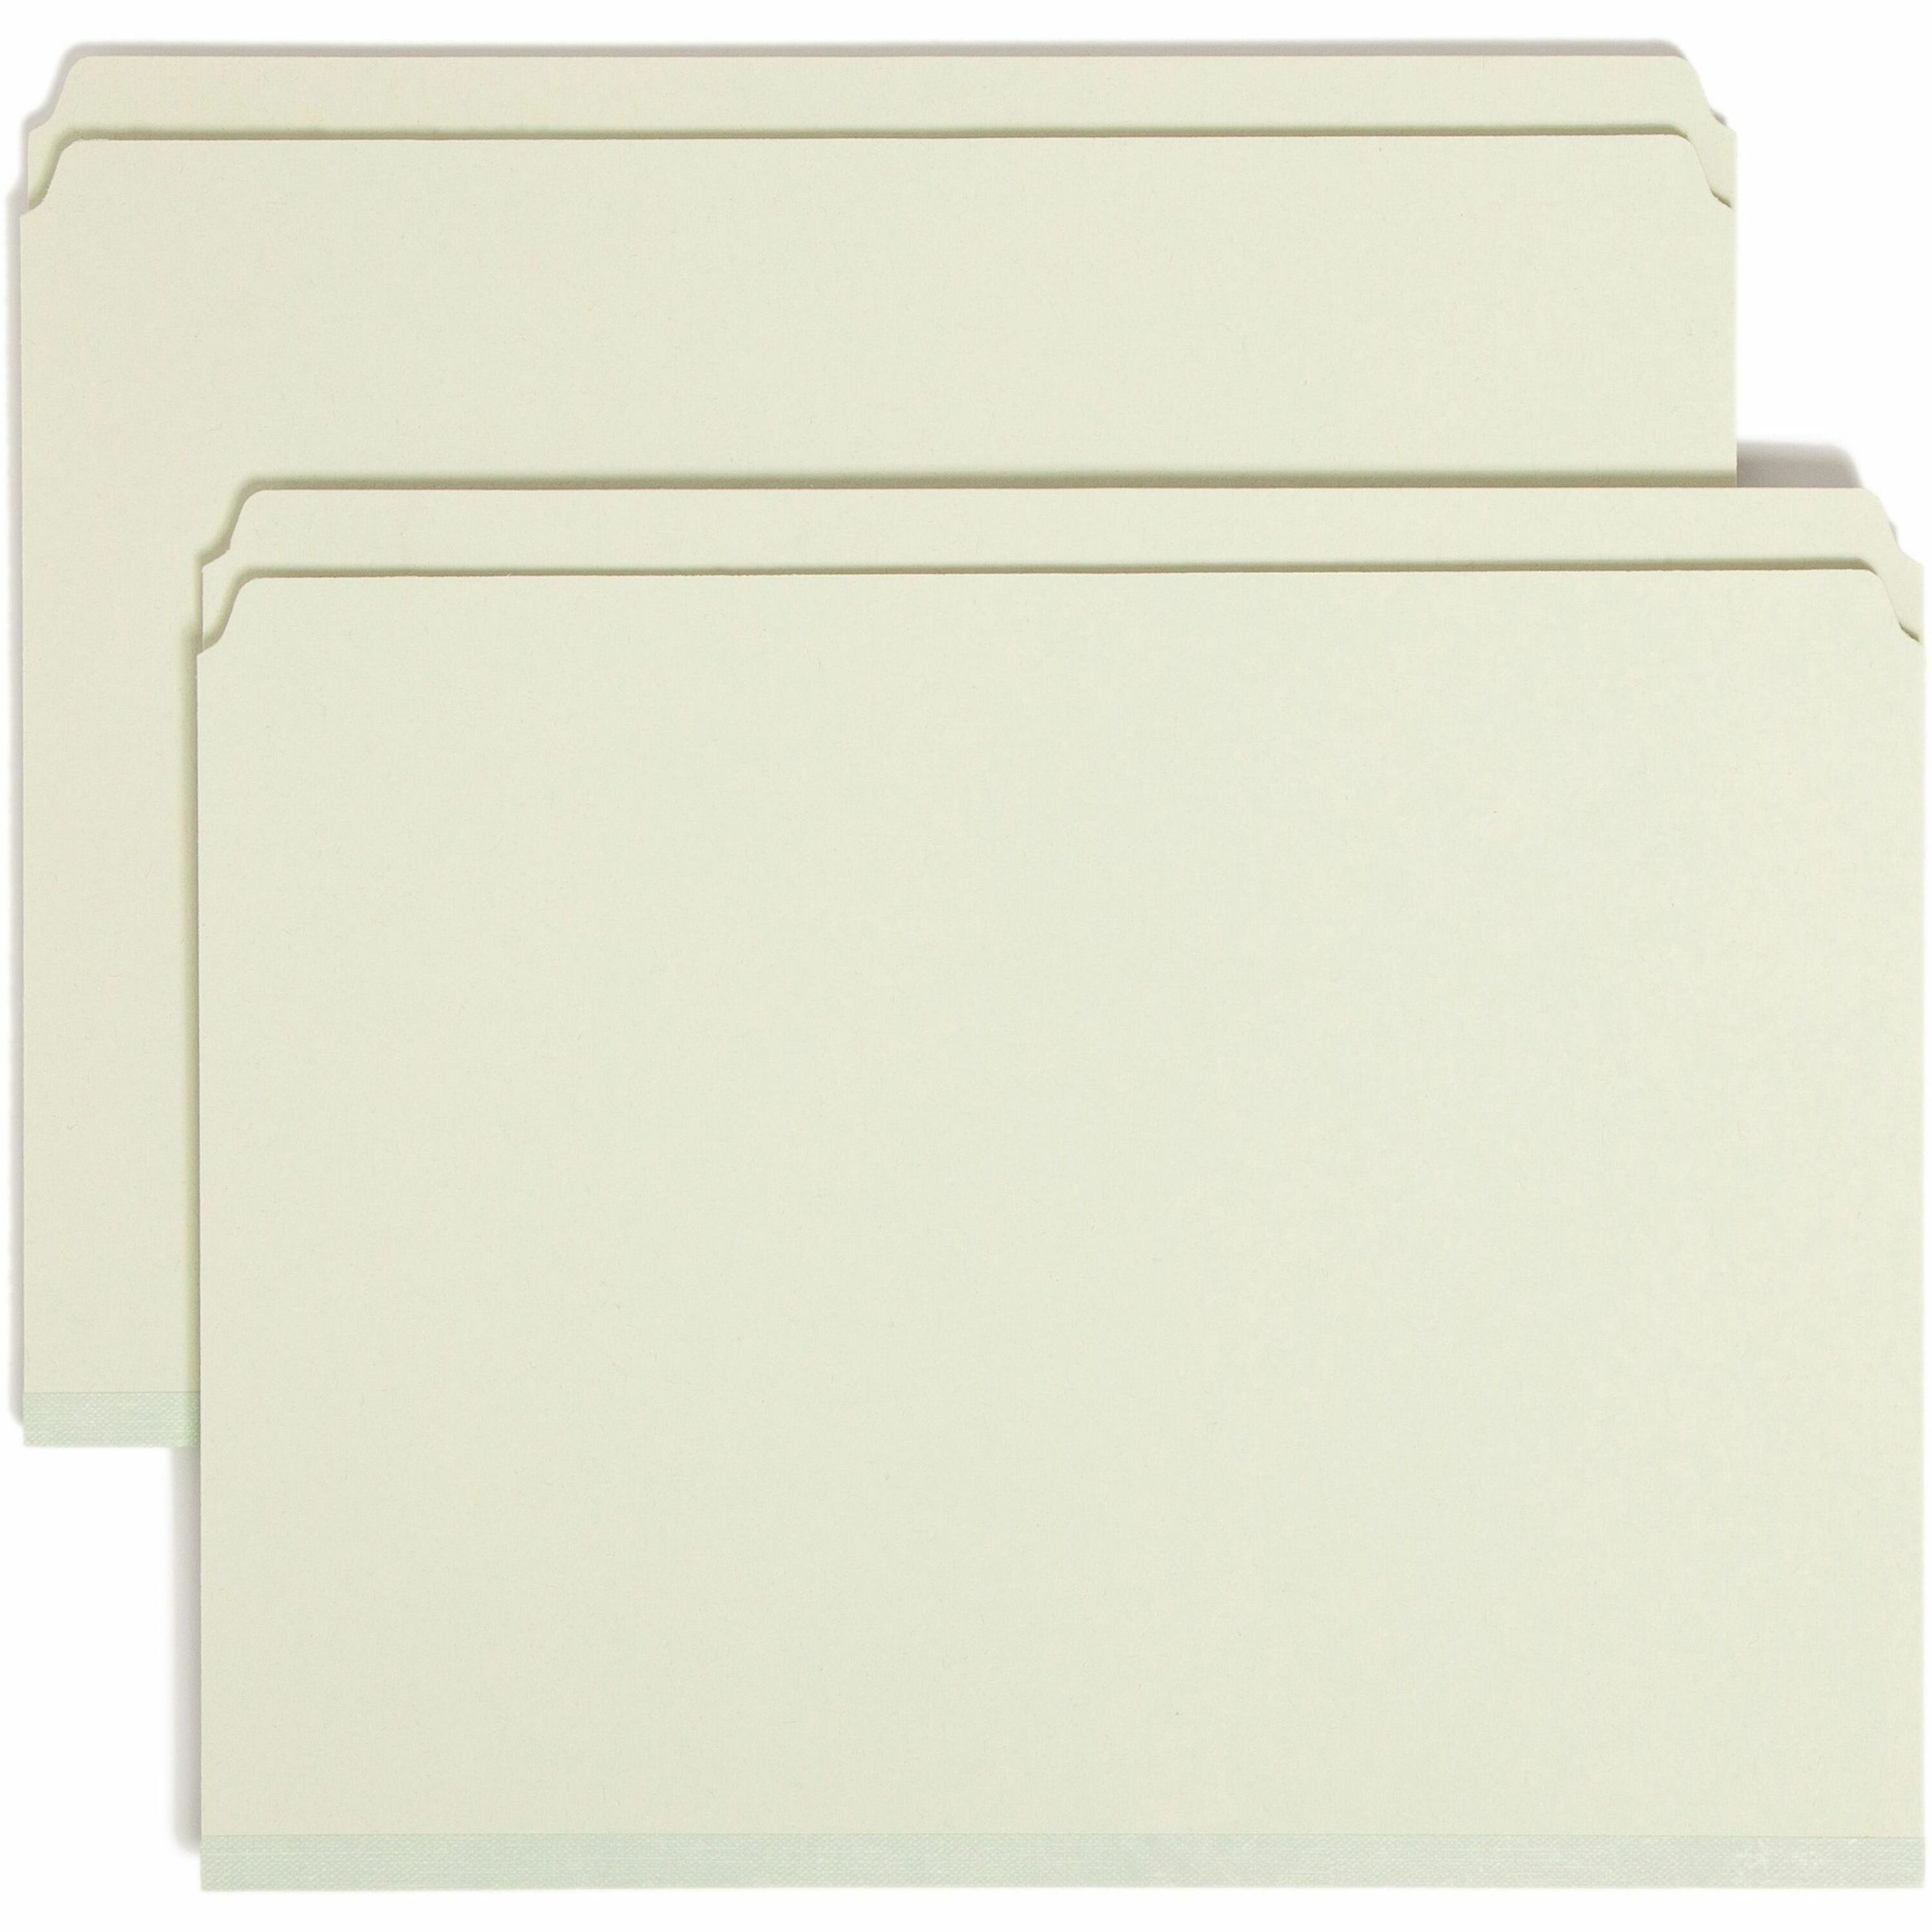 Smead Straight Tab Cut Letter Recycled Top Tab File Folder - 1" Folder Capacity - 8 1/2" x 11" - 1" Expansion - Pressboard - Gray, Green - 100% Recycled - 25 / Box - 